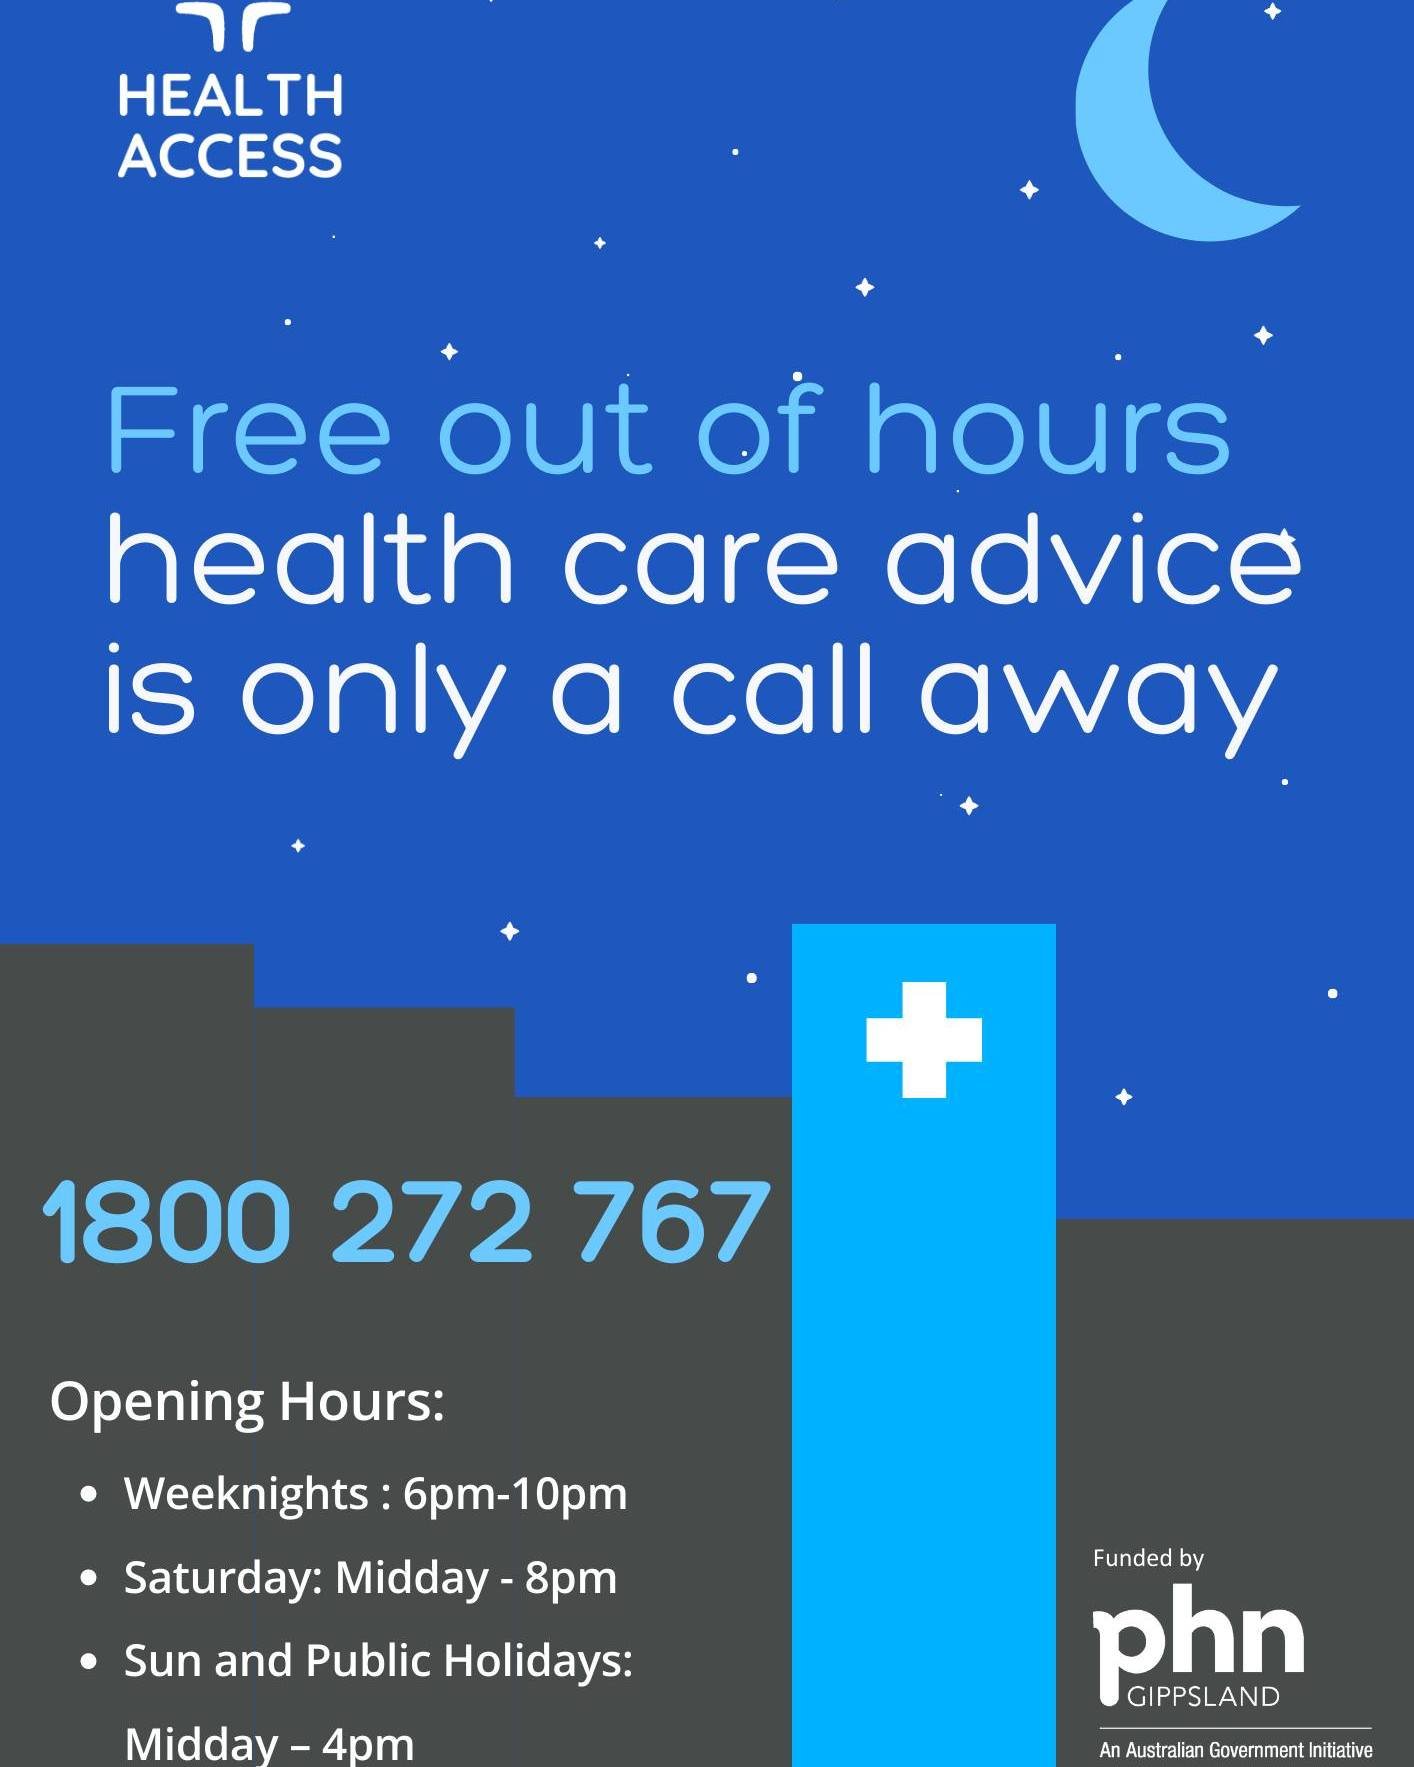 👨&zwj;⚕️ Did you know that after hour GP phone consults are free to people living in a Gippsland thanks to Gippsland PHN ? 👩&zwj;⚕️

For more information visit:
https://gphn.org.au/what-we-do/programs/after-hours-program/

#gippsland #afterhours #m